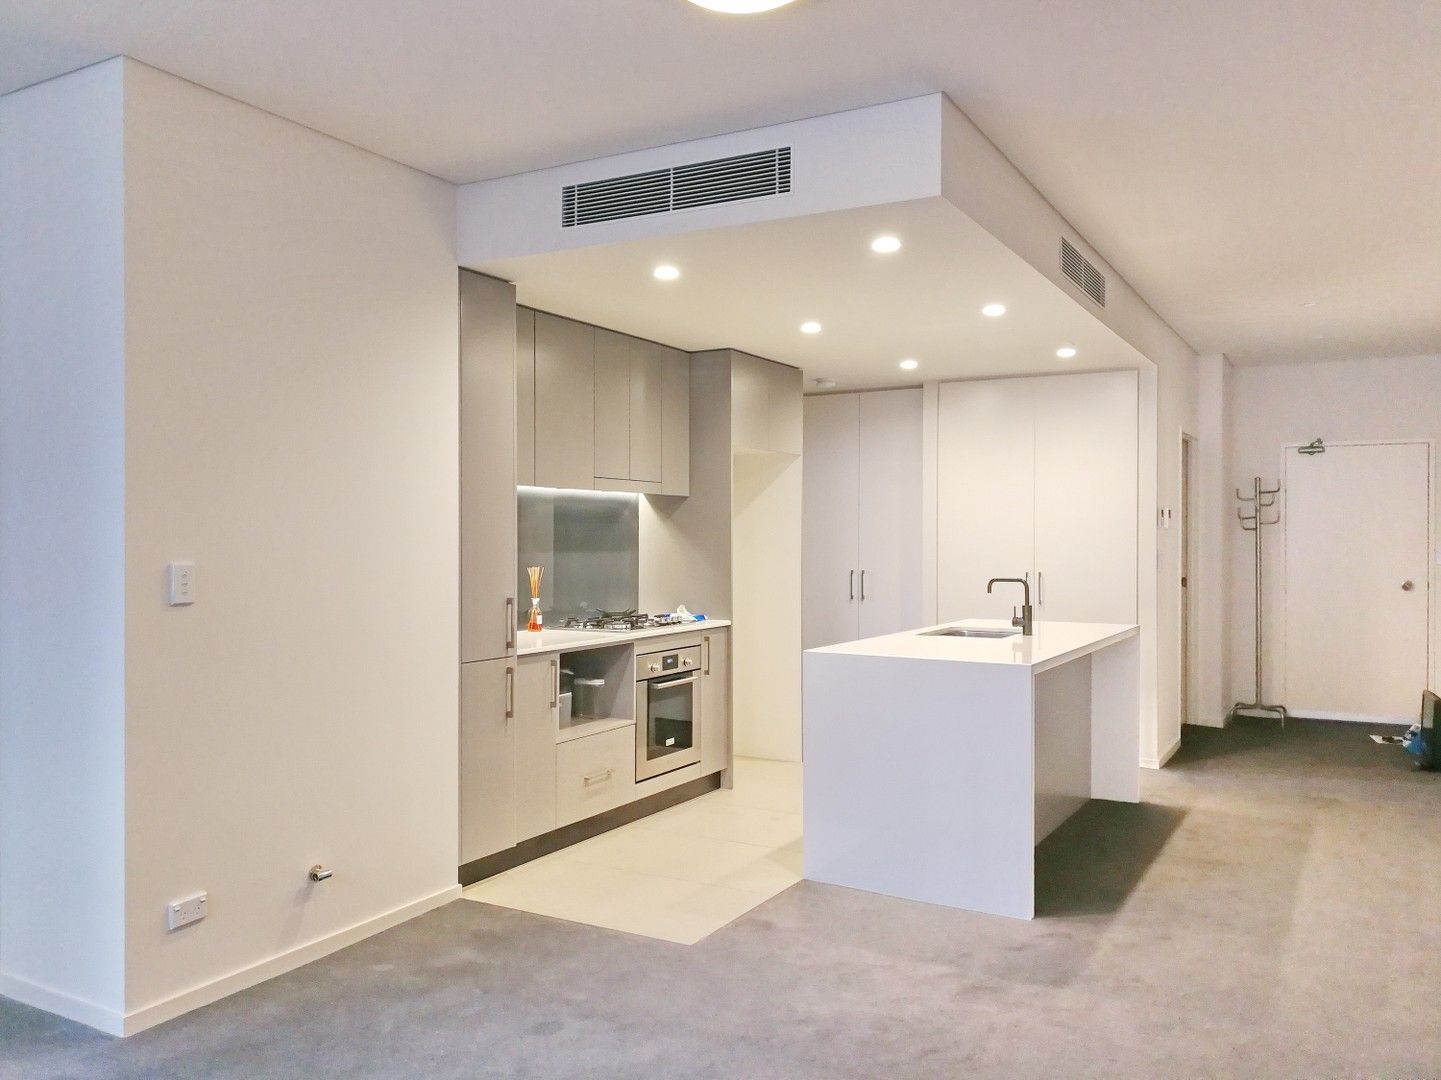 2 bedrooms Apartment / Unit / Flat in Eve street ERSKINEVILLE NSW, 2043